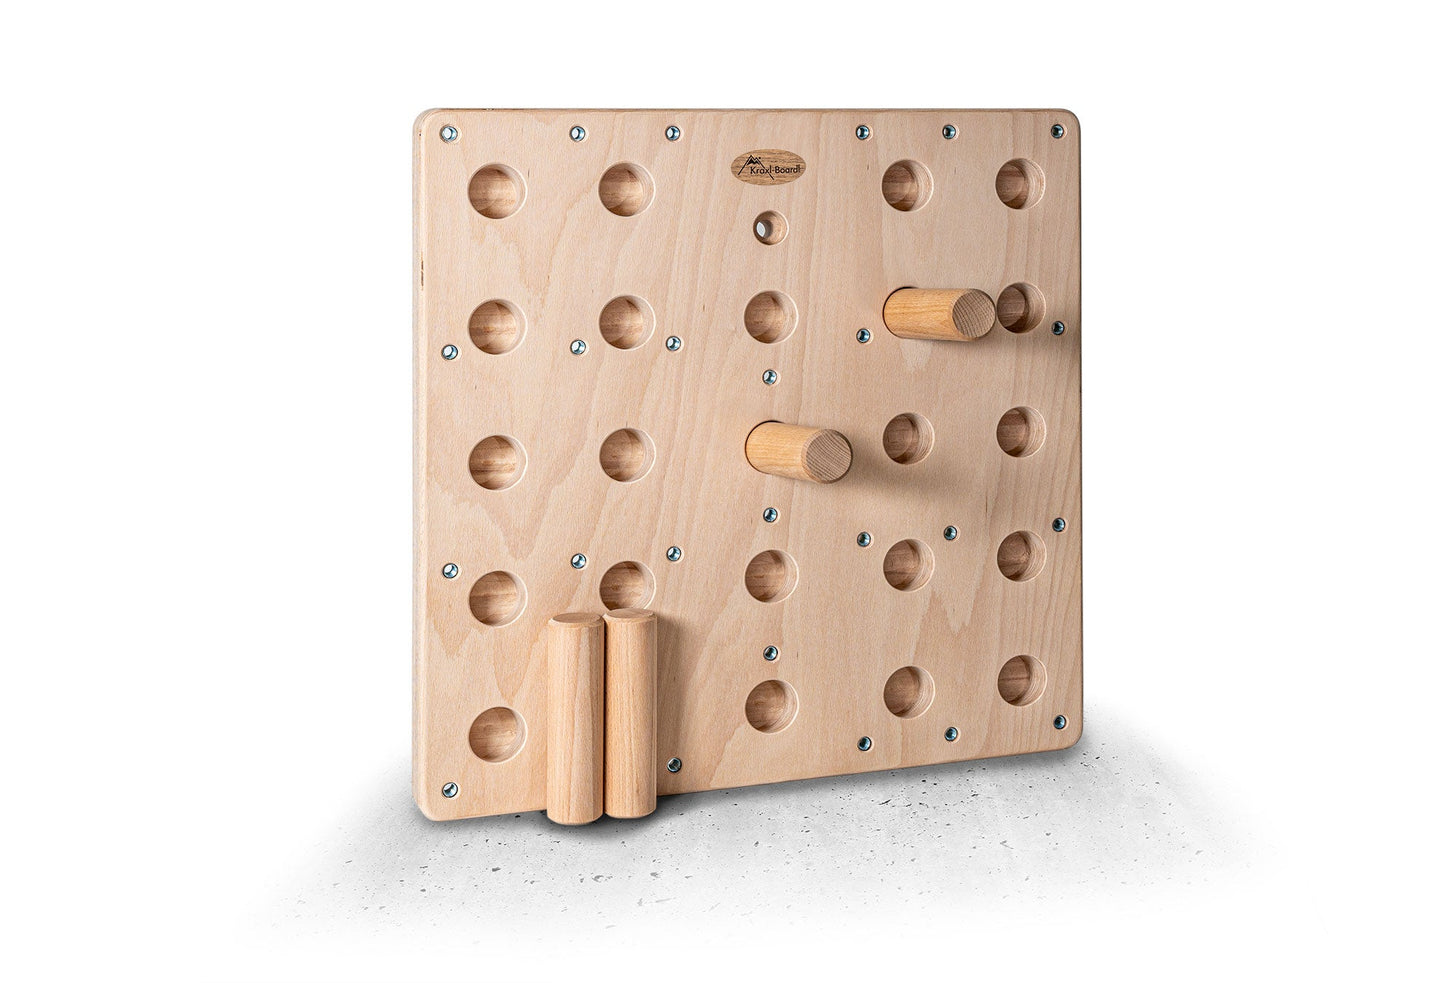 Clip-on combination pegboard - for the Kraxlboard Classic, Xtreme and Rock